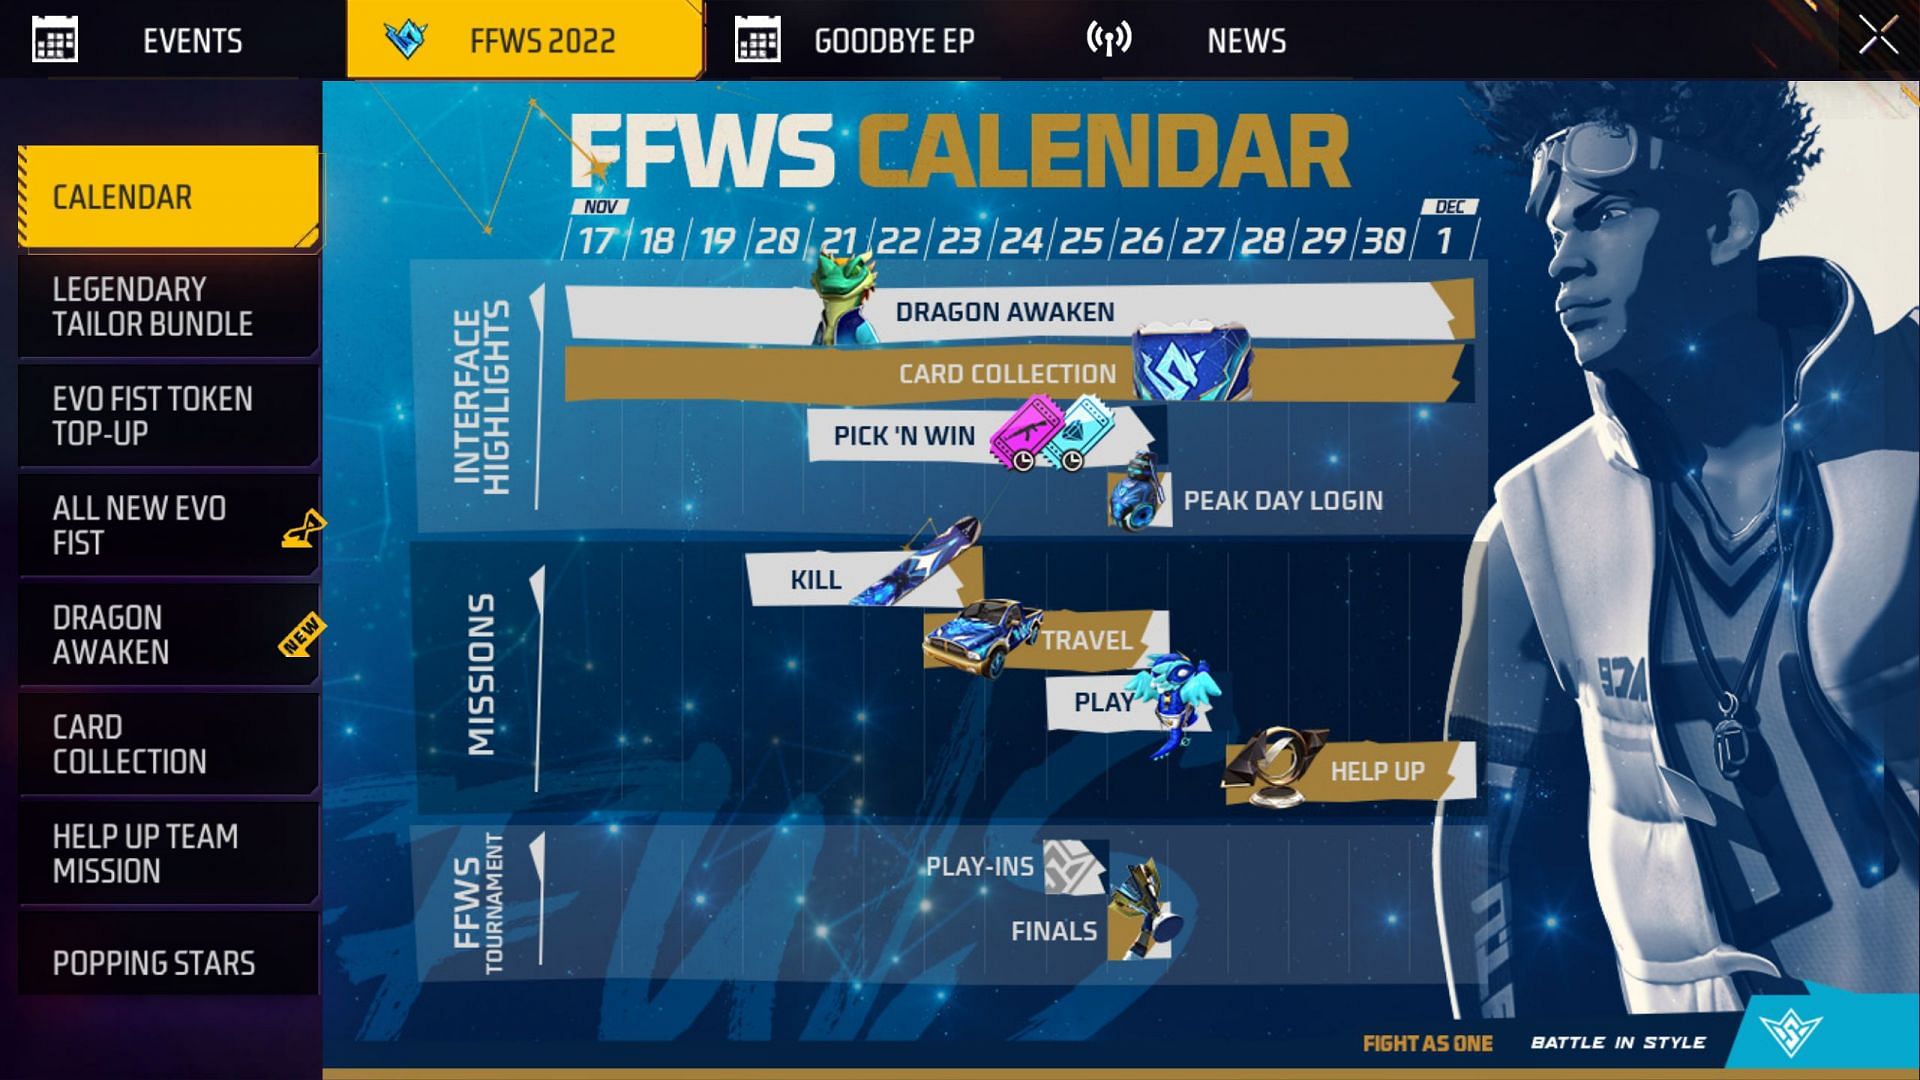 This is the FFWS 2022 event calendar featuring the available events (Image via Garena)